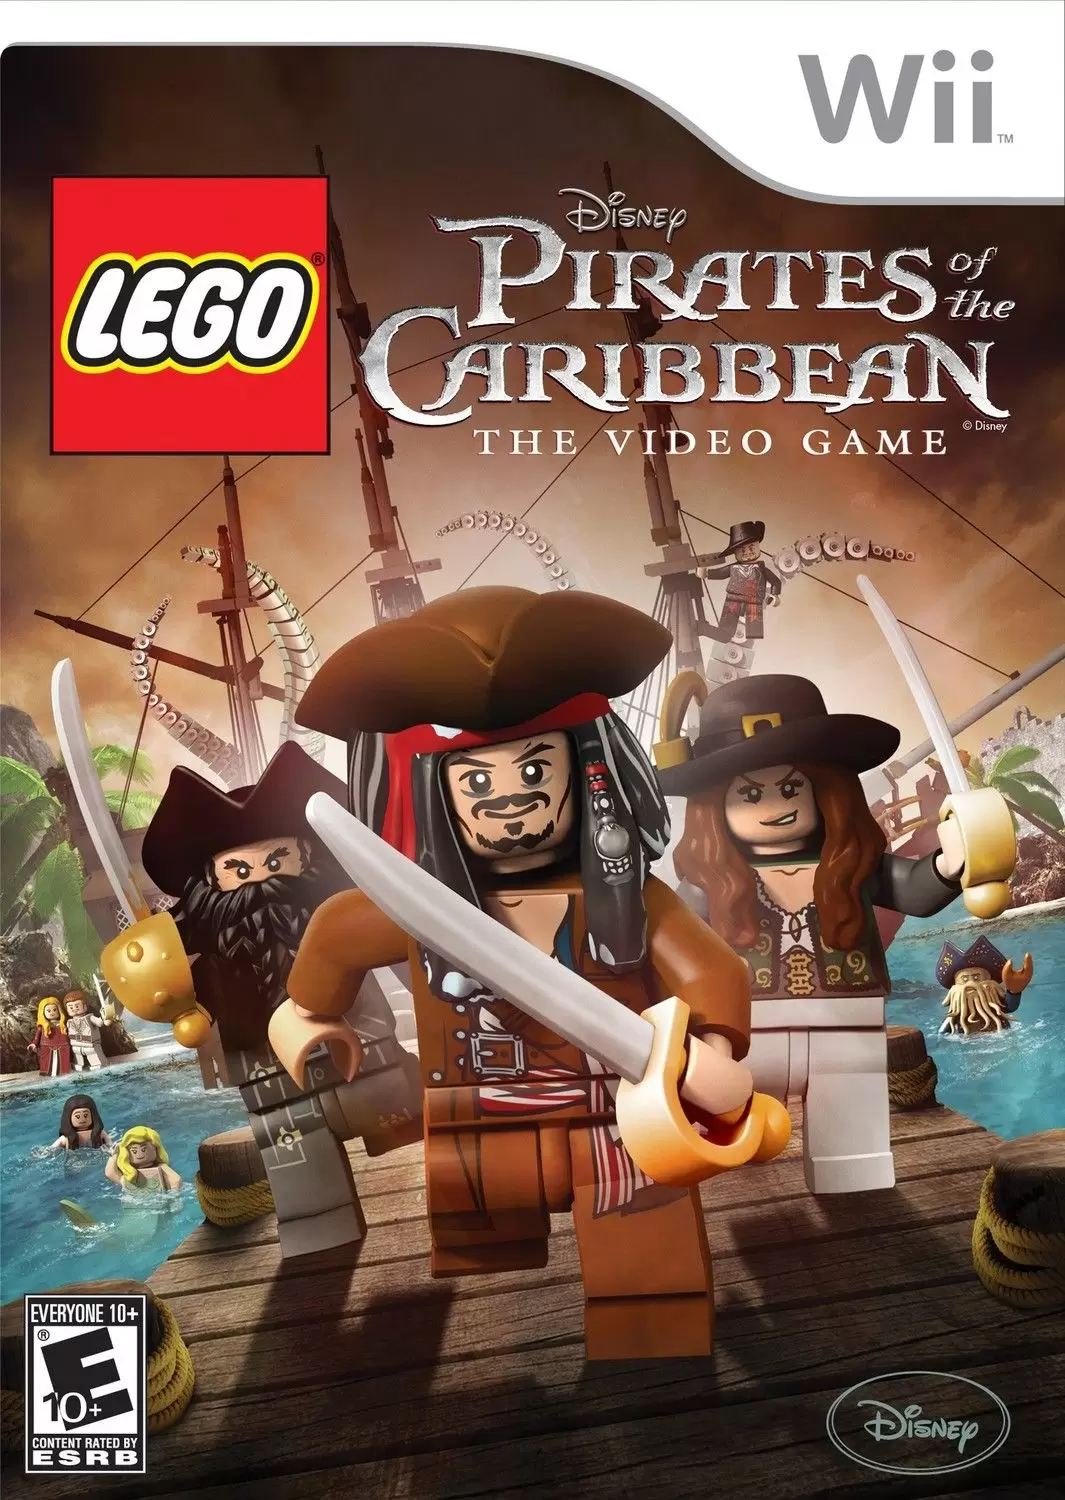 Nintendo Wii Games - LEGO Pirates of the Caribbean: The Video Game